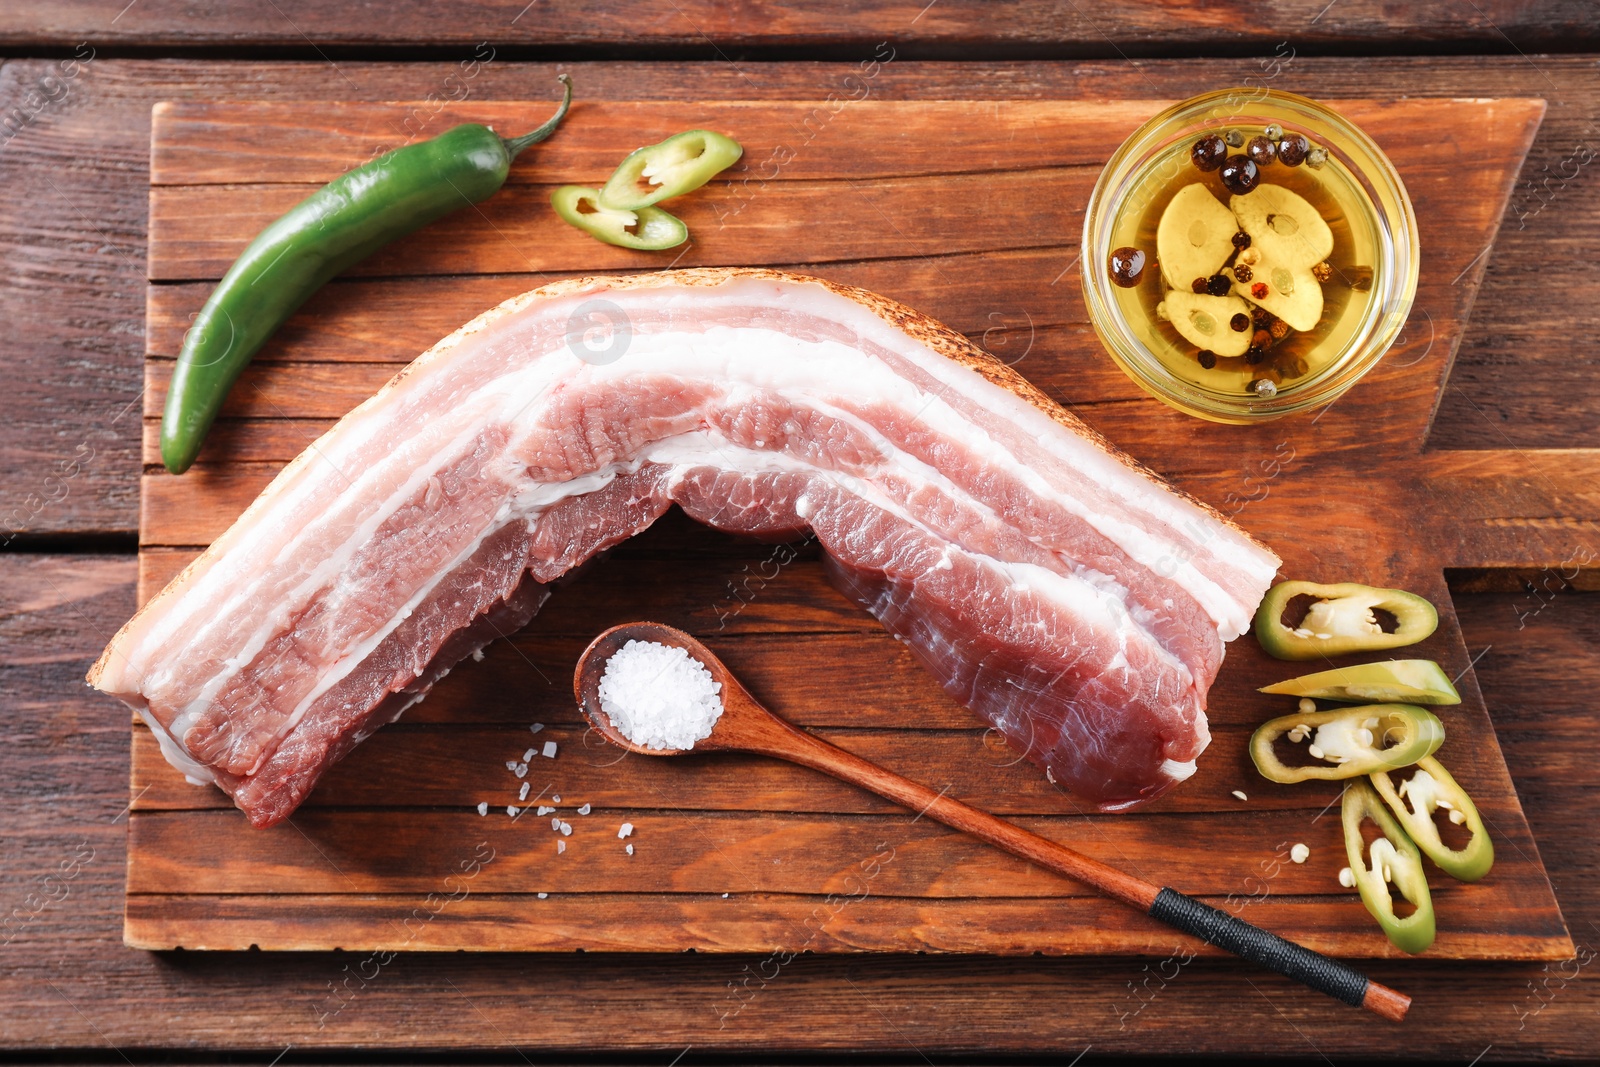 Photo of Piece of raw pork belly, green chili pepper and oil with spices on wooden table, top view